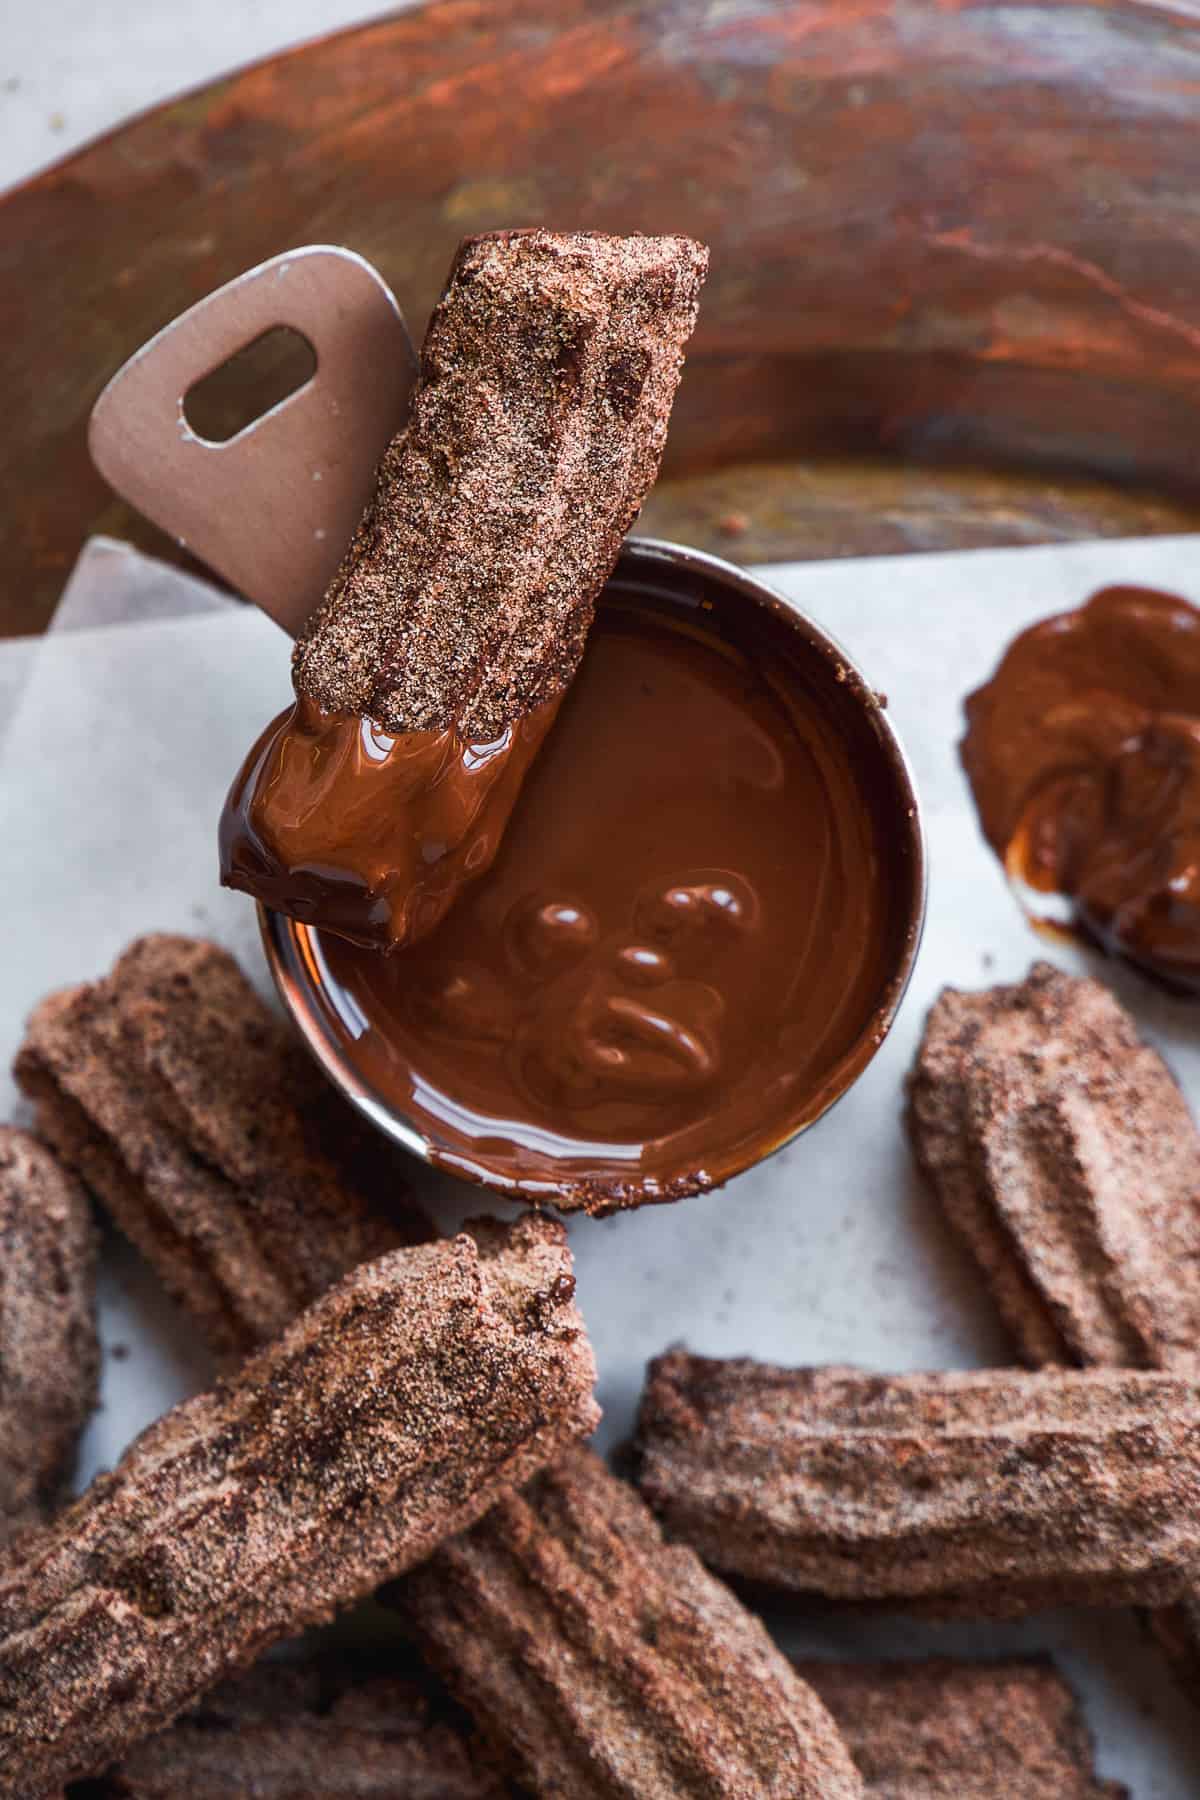 Chocolate churros with chocolate dipping sauce on a copper platter.